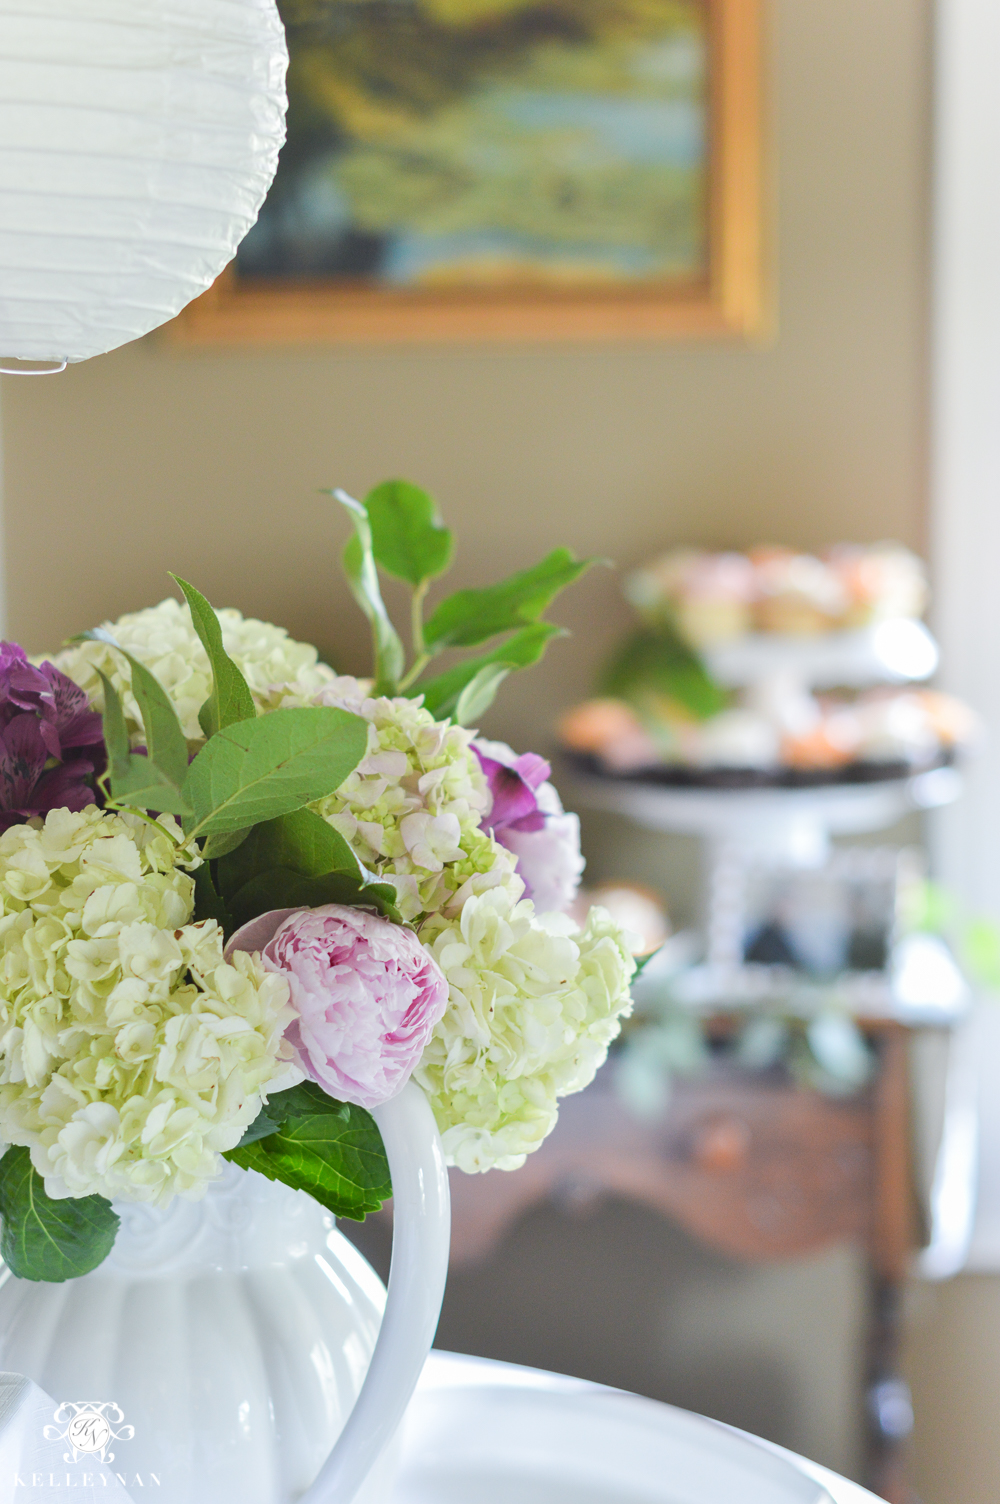 Southern Garden Party Bridal Shower Ideas-floral arrangement on food table